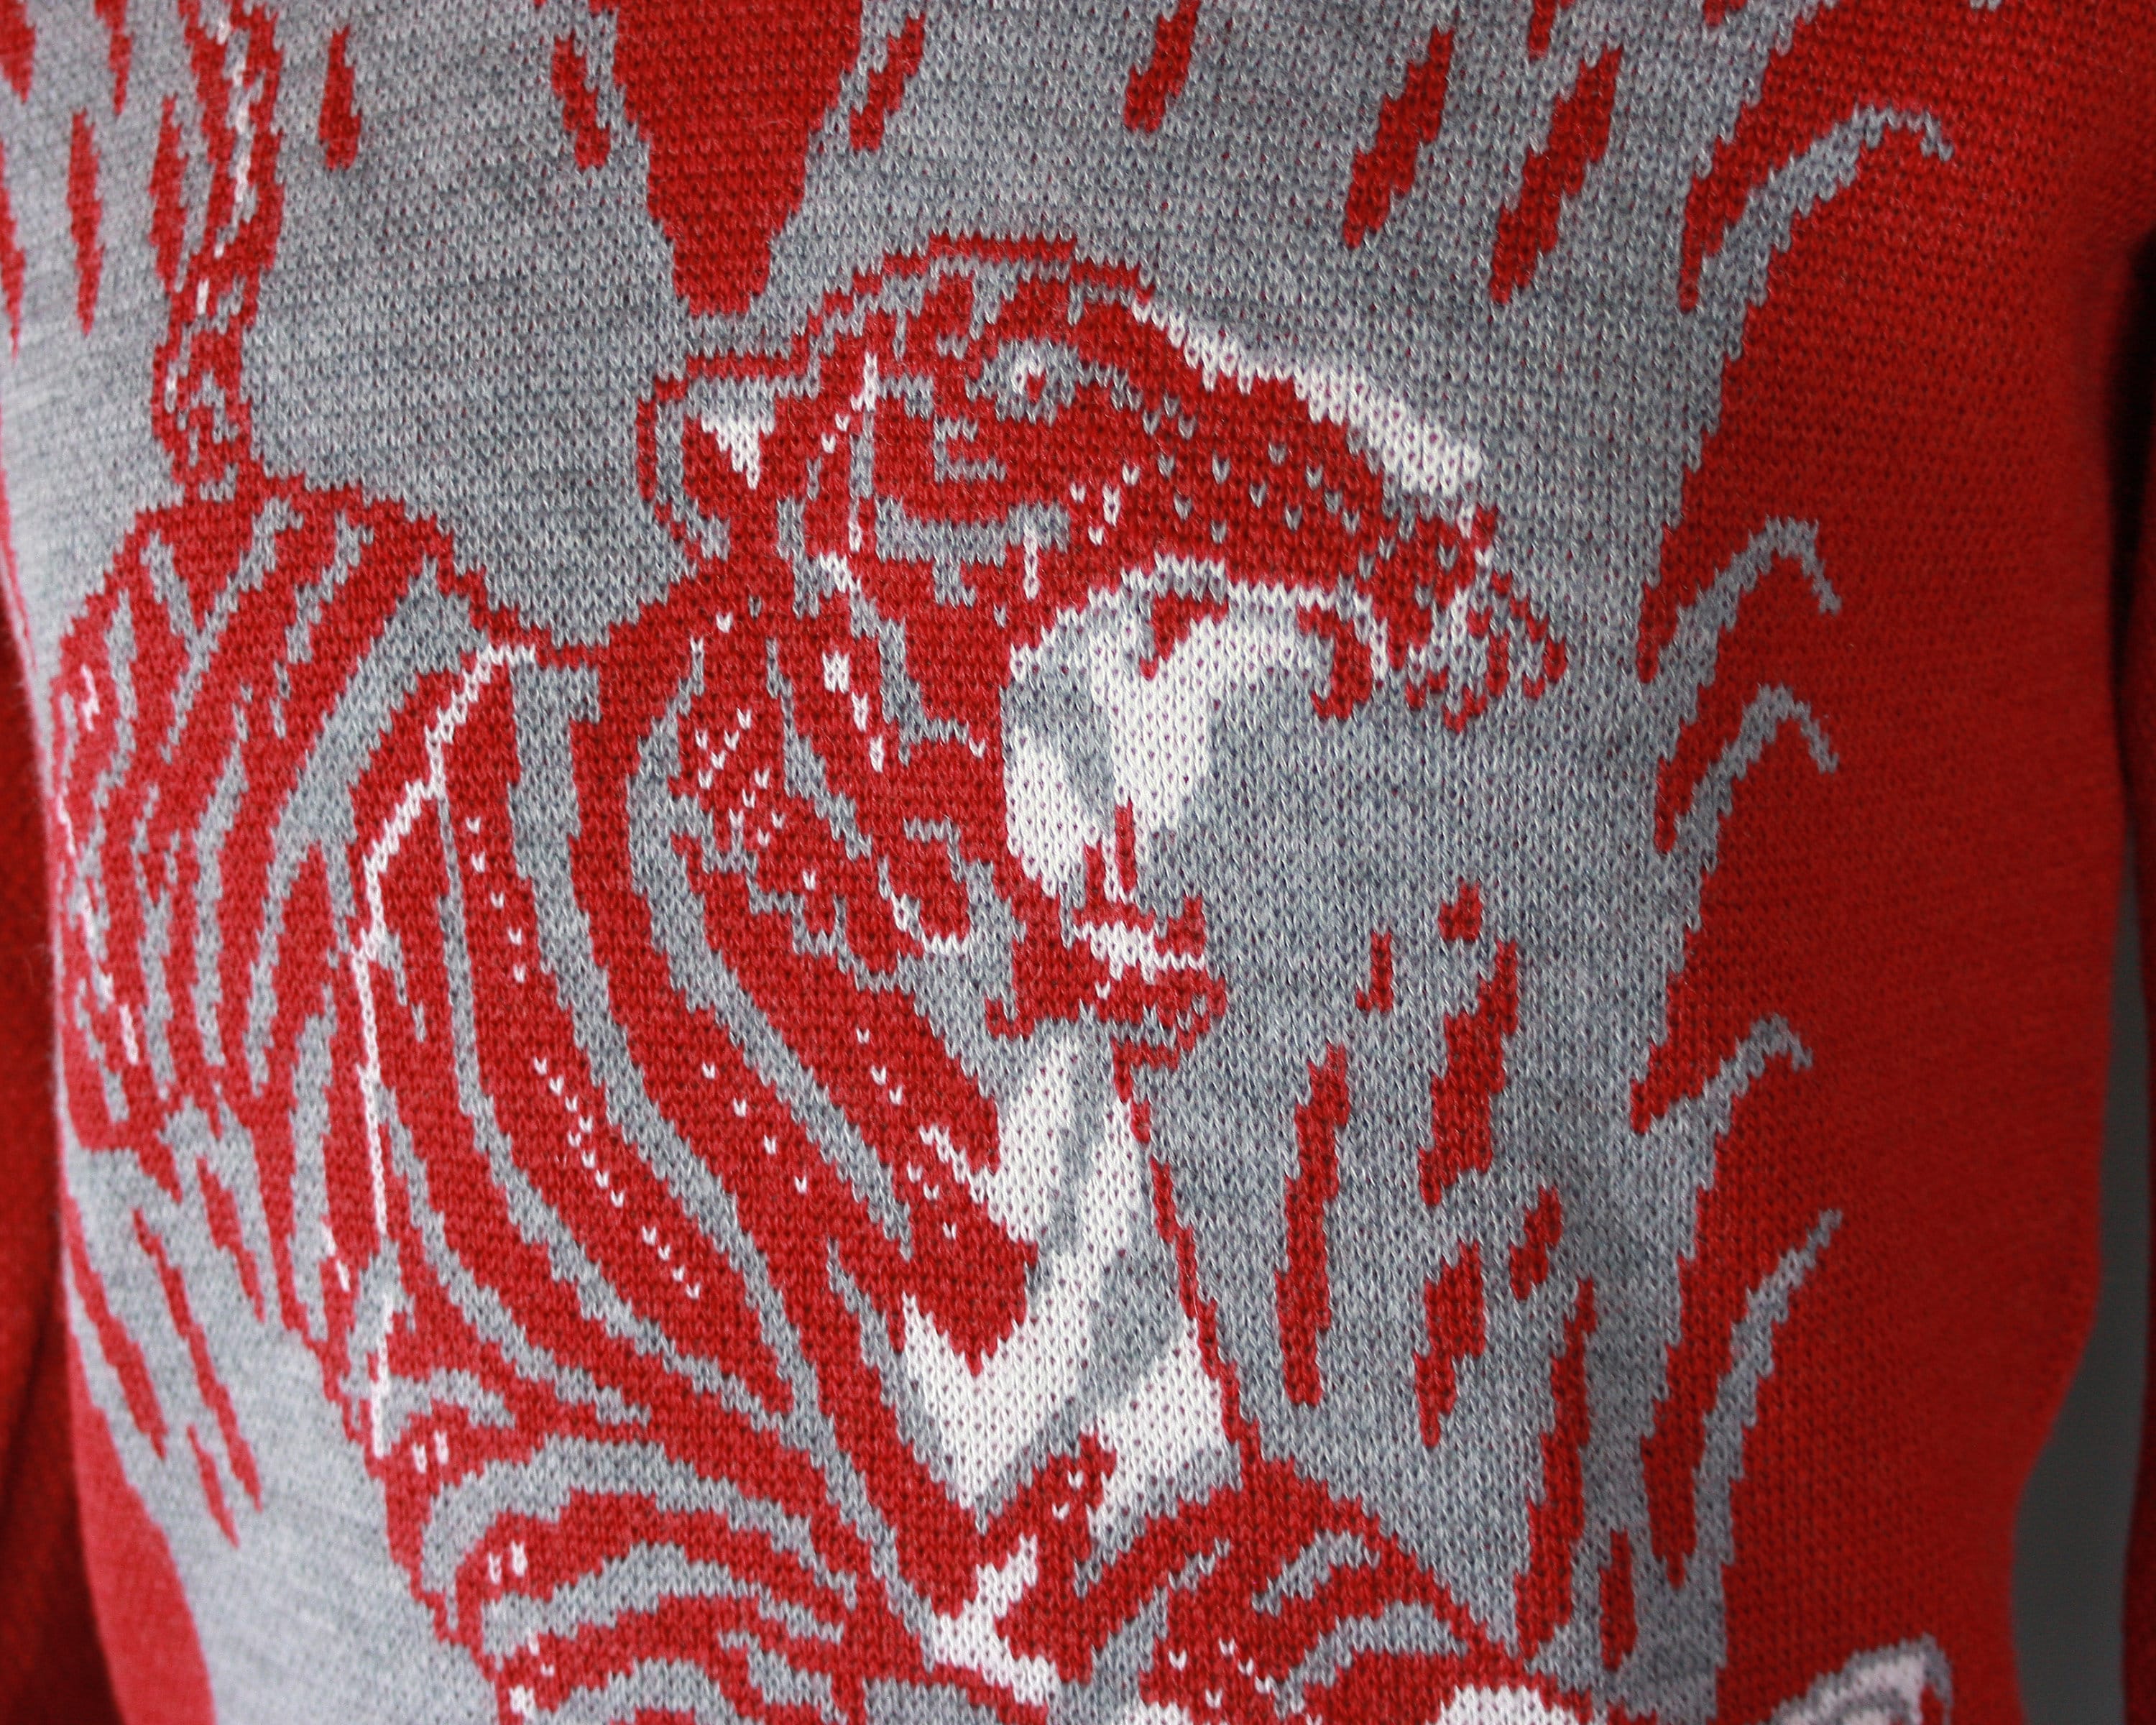 GROOVIN HIGH Tiger Sweater Small 1940s Style Knit Wool Pullover with Dark Red & Grey Design